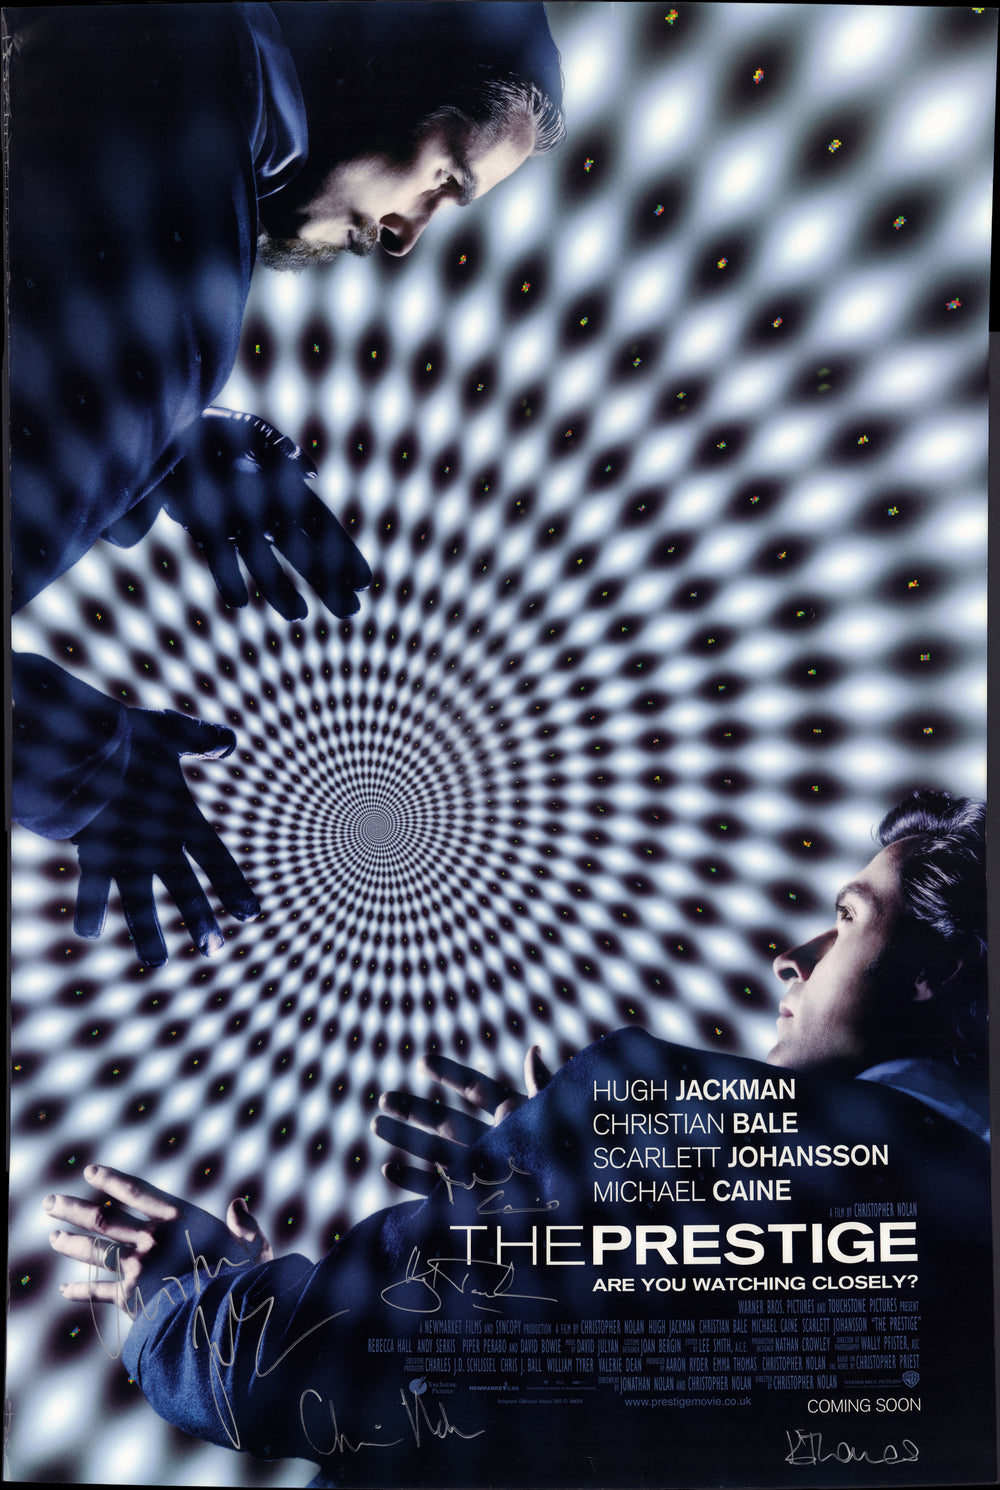 The Prestige 27x40 Double Sided Poster Signed by Christopher Nolan, Emma Thomas, Michael Caine, Christian Bale, & Hugh Jackman